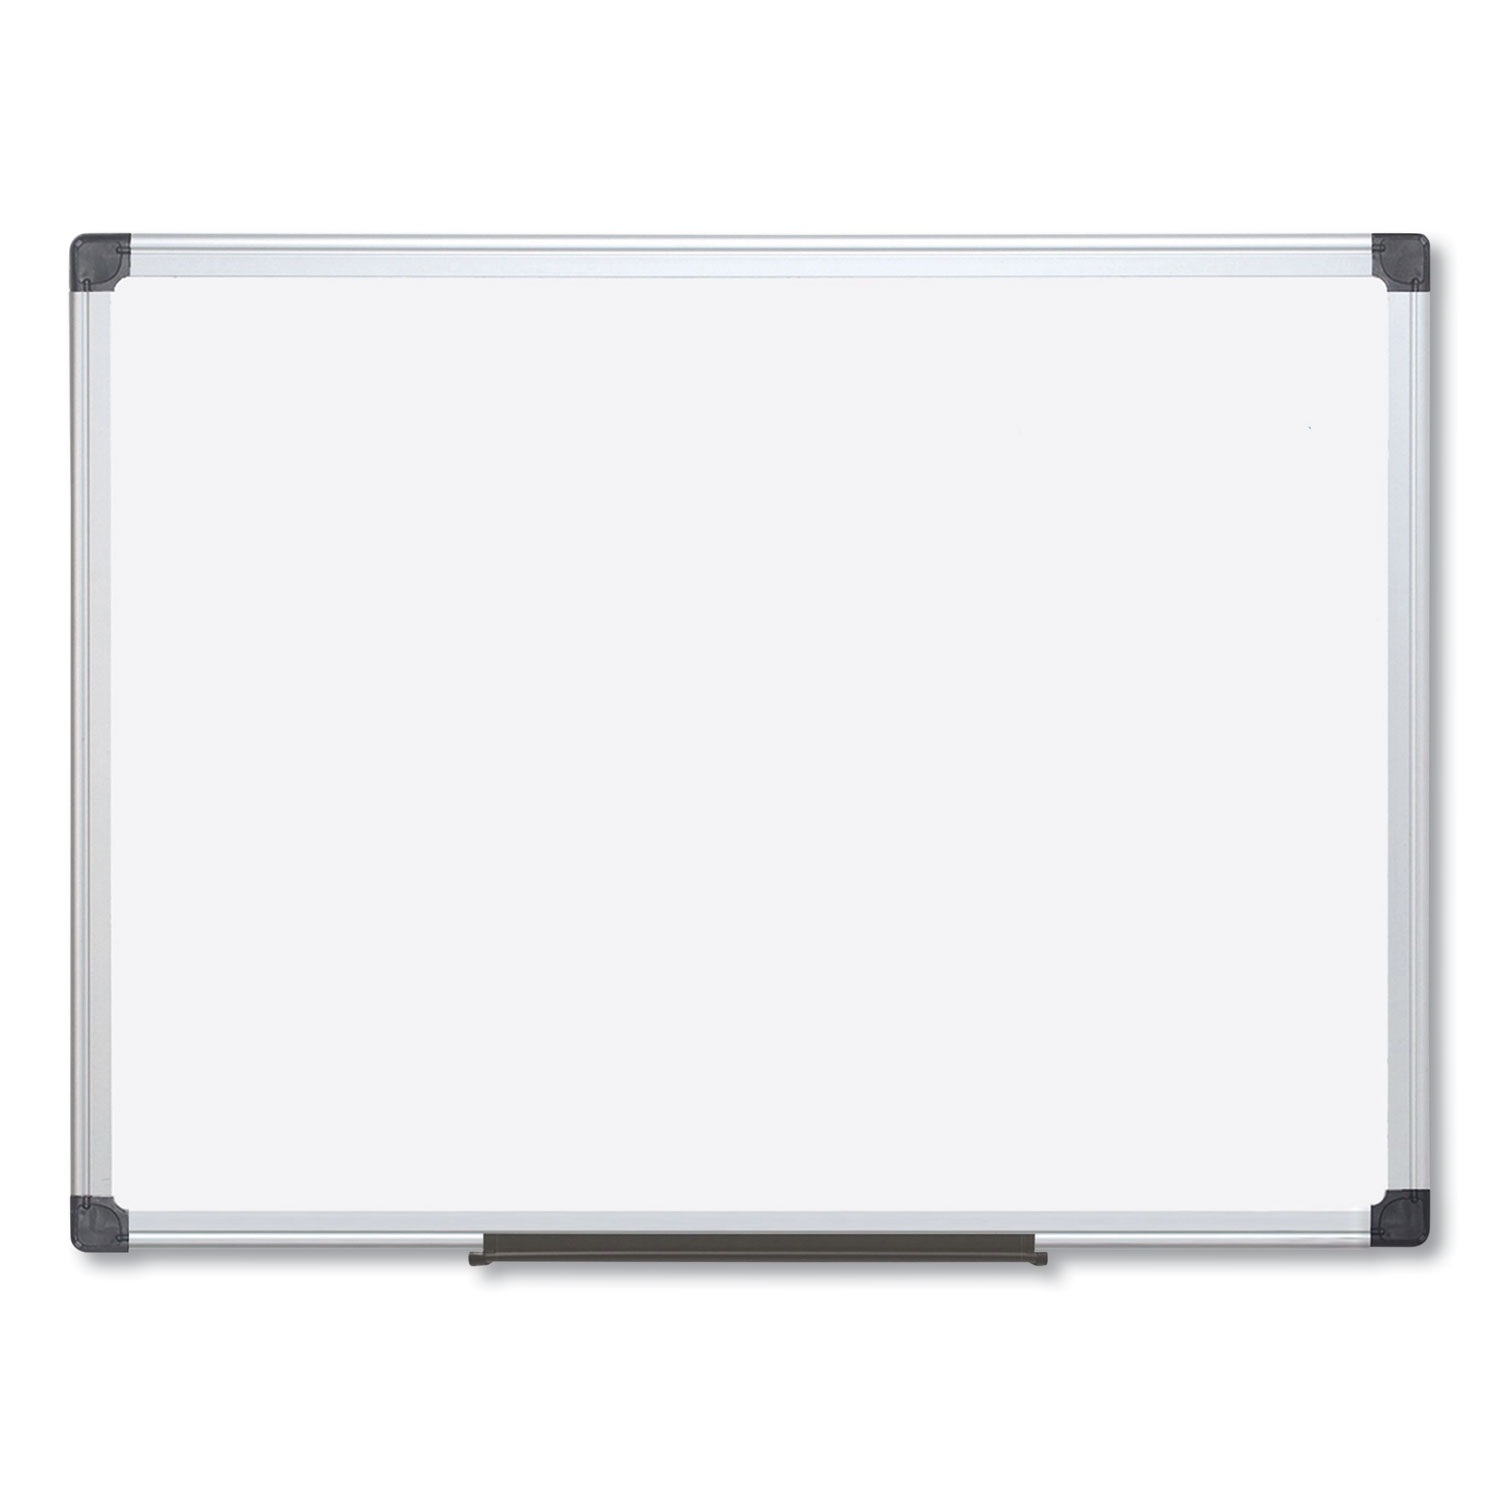 FORAY Desk-Style Overhead/Flip Chart Markers With Soft Grip